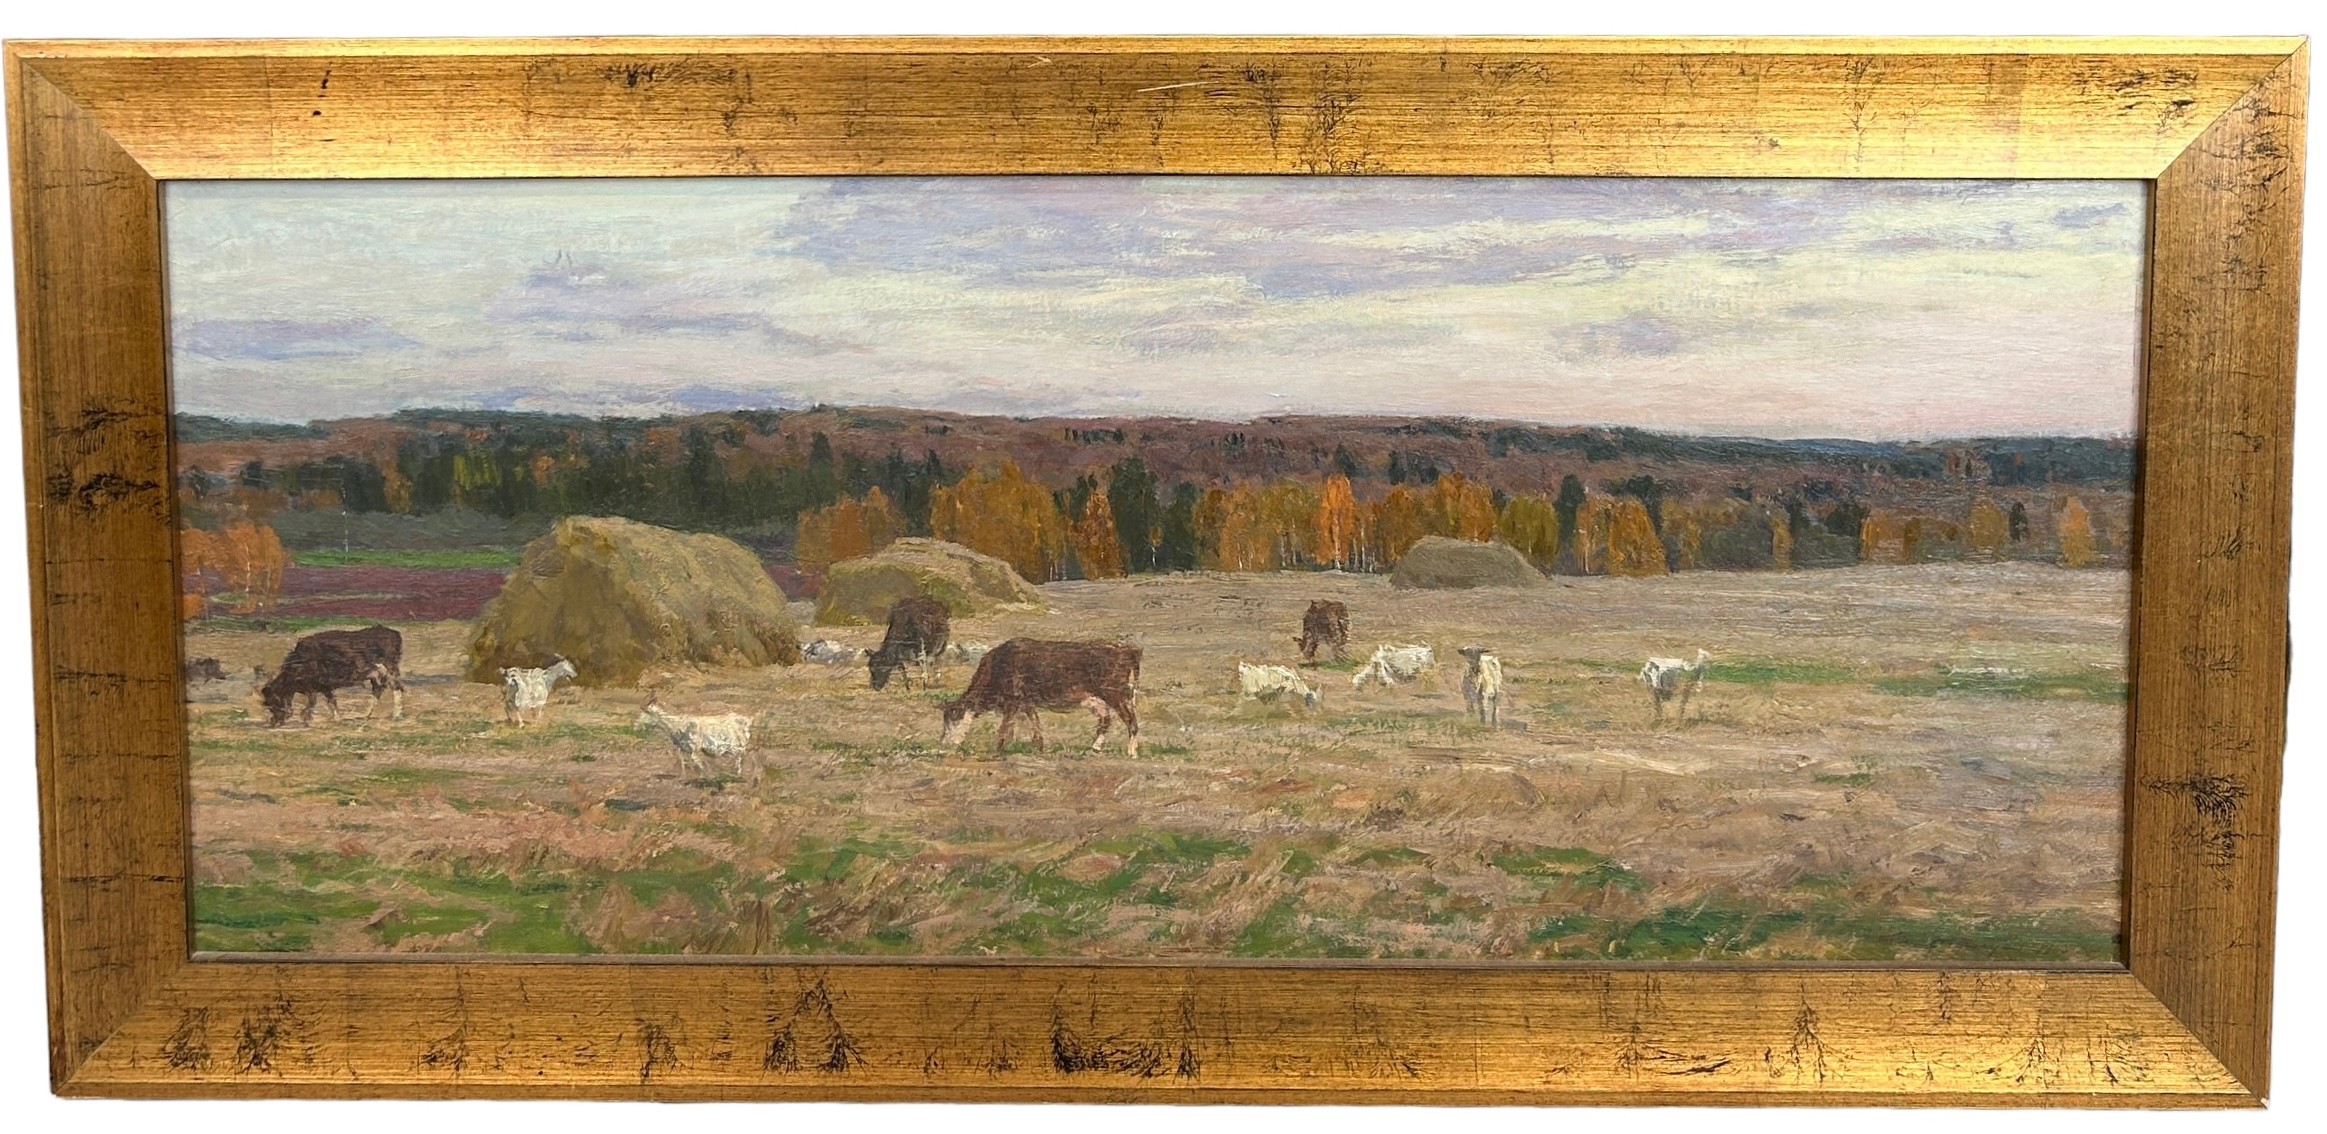 ALEKSEI MIKHAILOVICH GRITSAI (1914-1998): AN OIL ON BOARD PAINTING DEPICTING CATTLE IN A FIELD